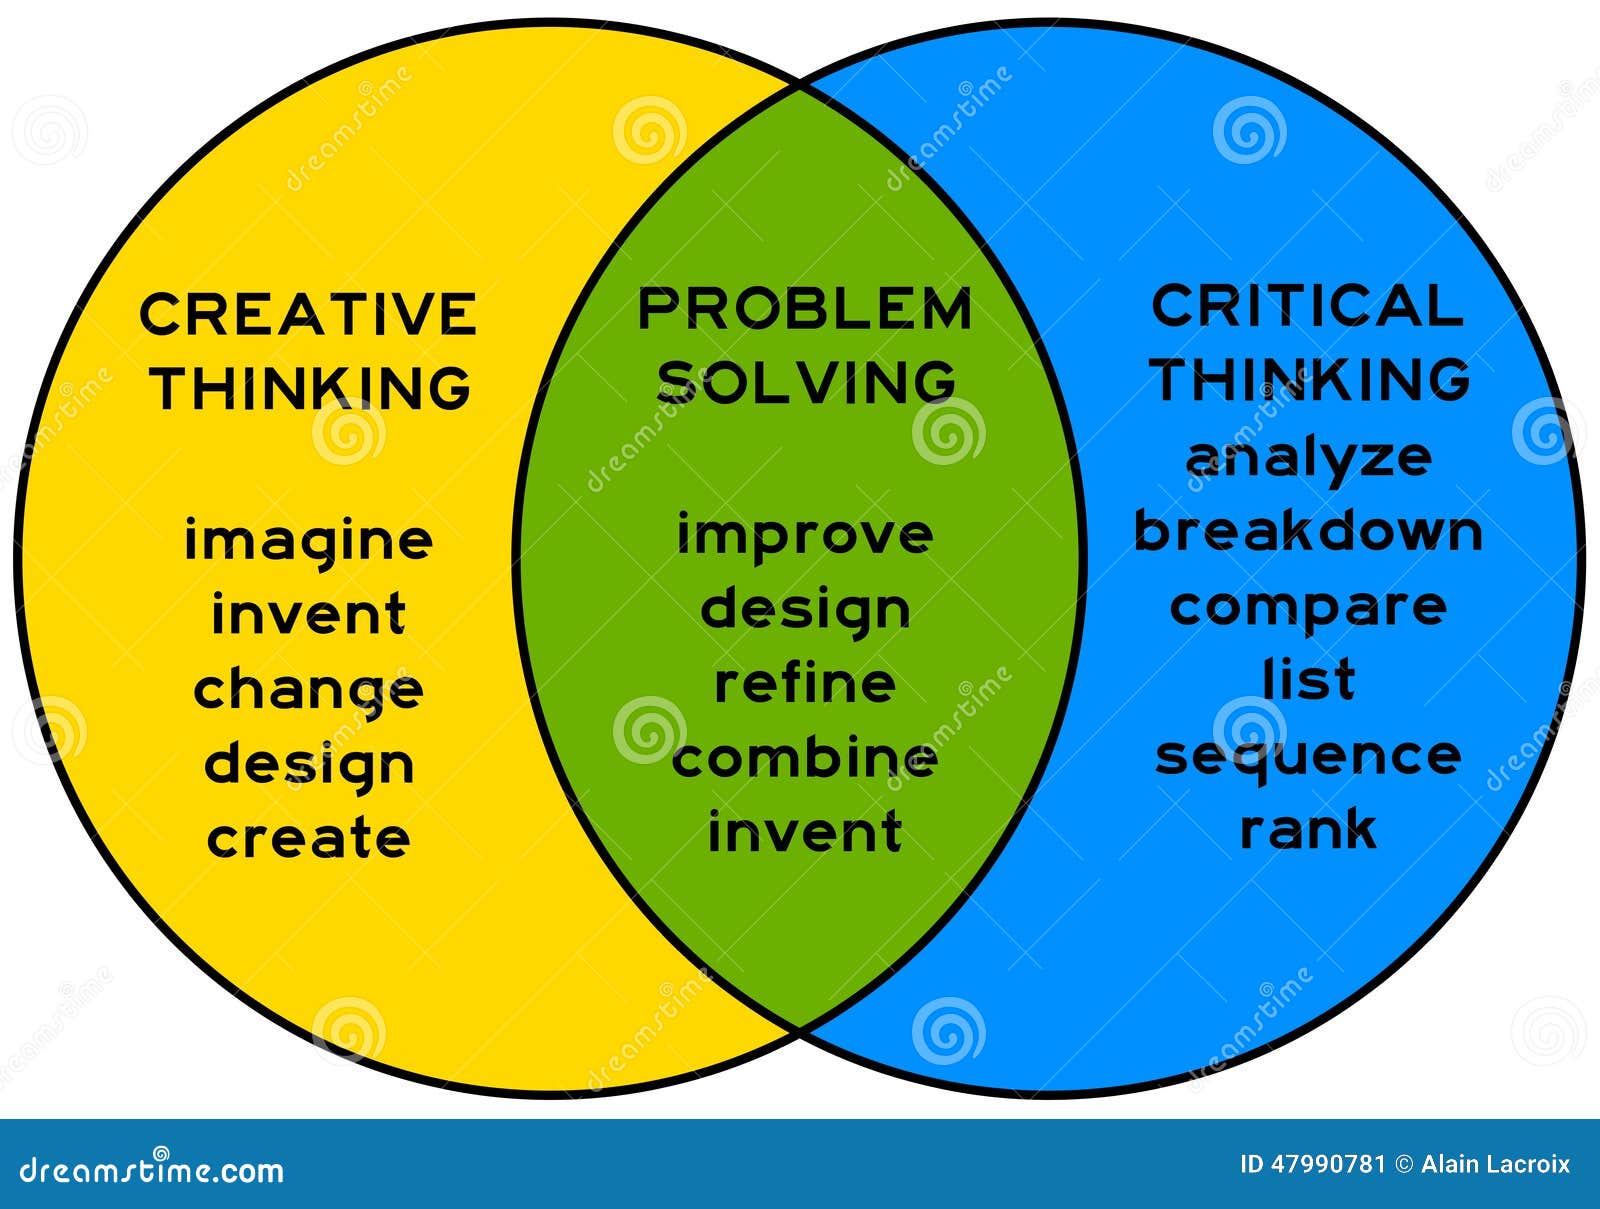 Creative and critical thinking